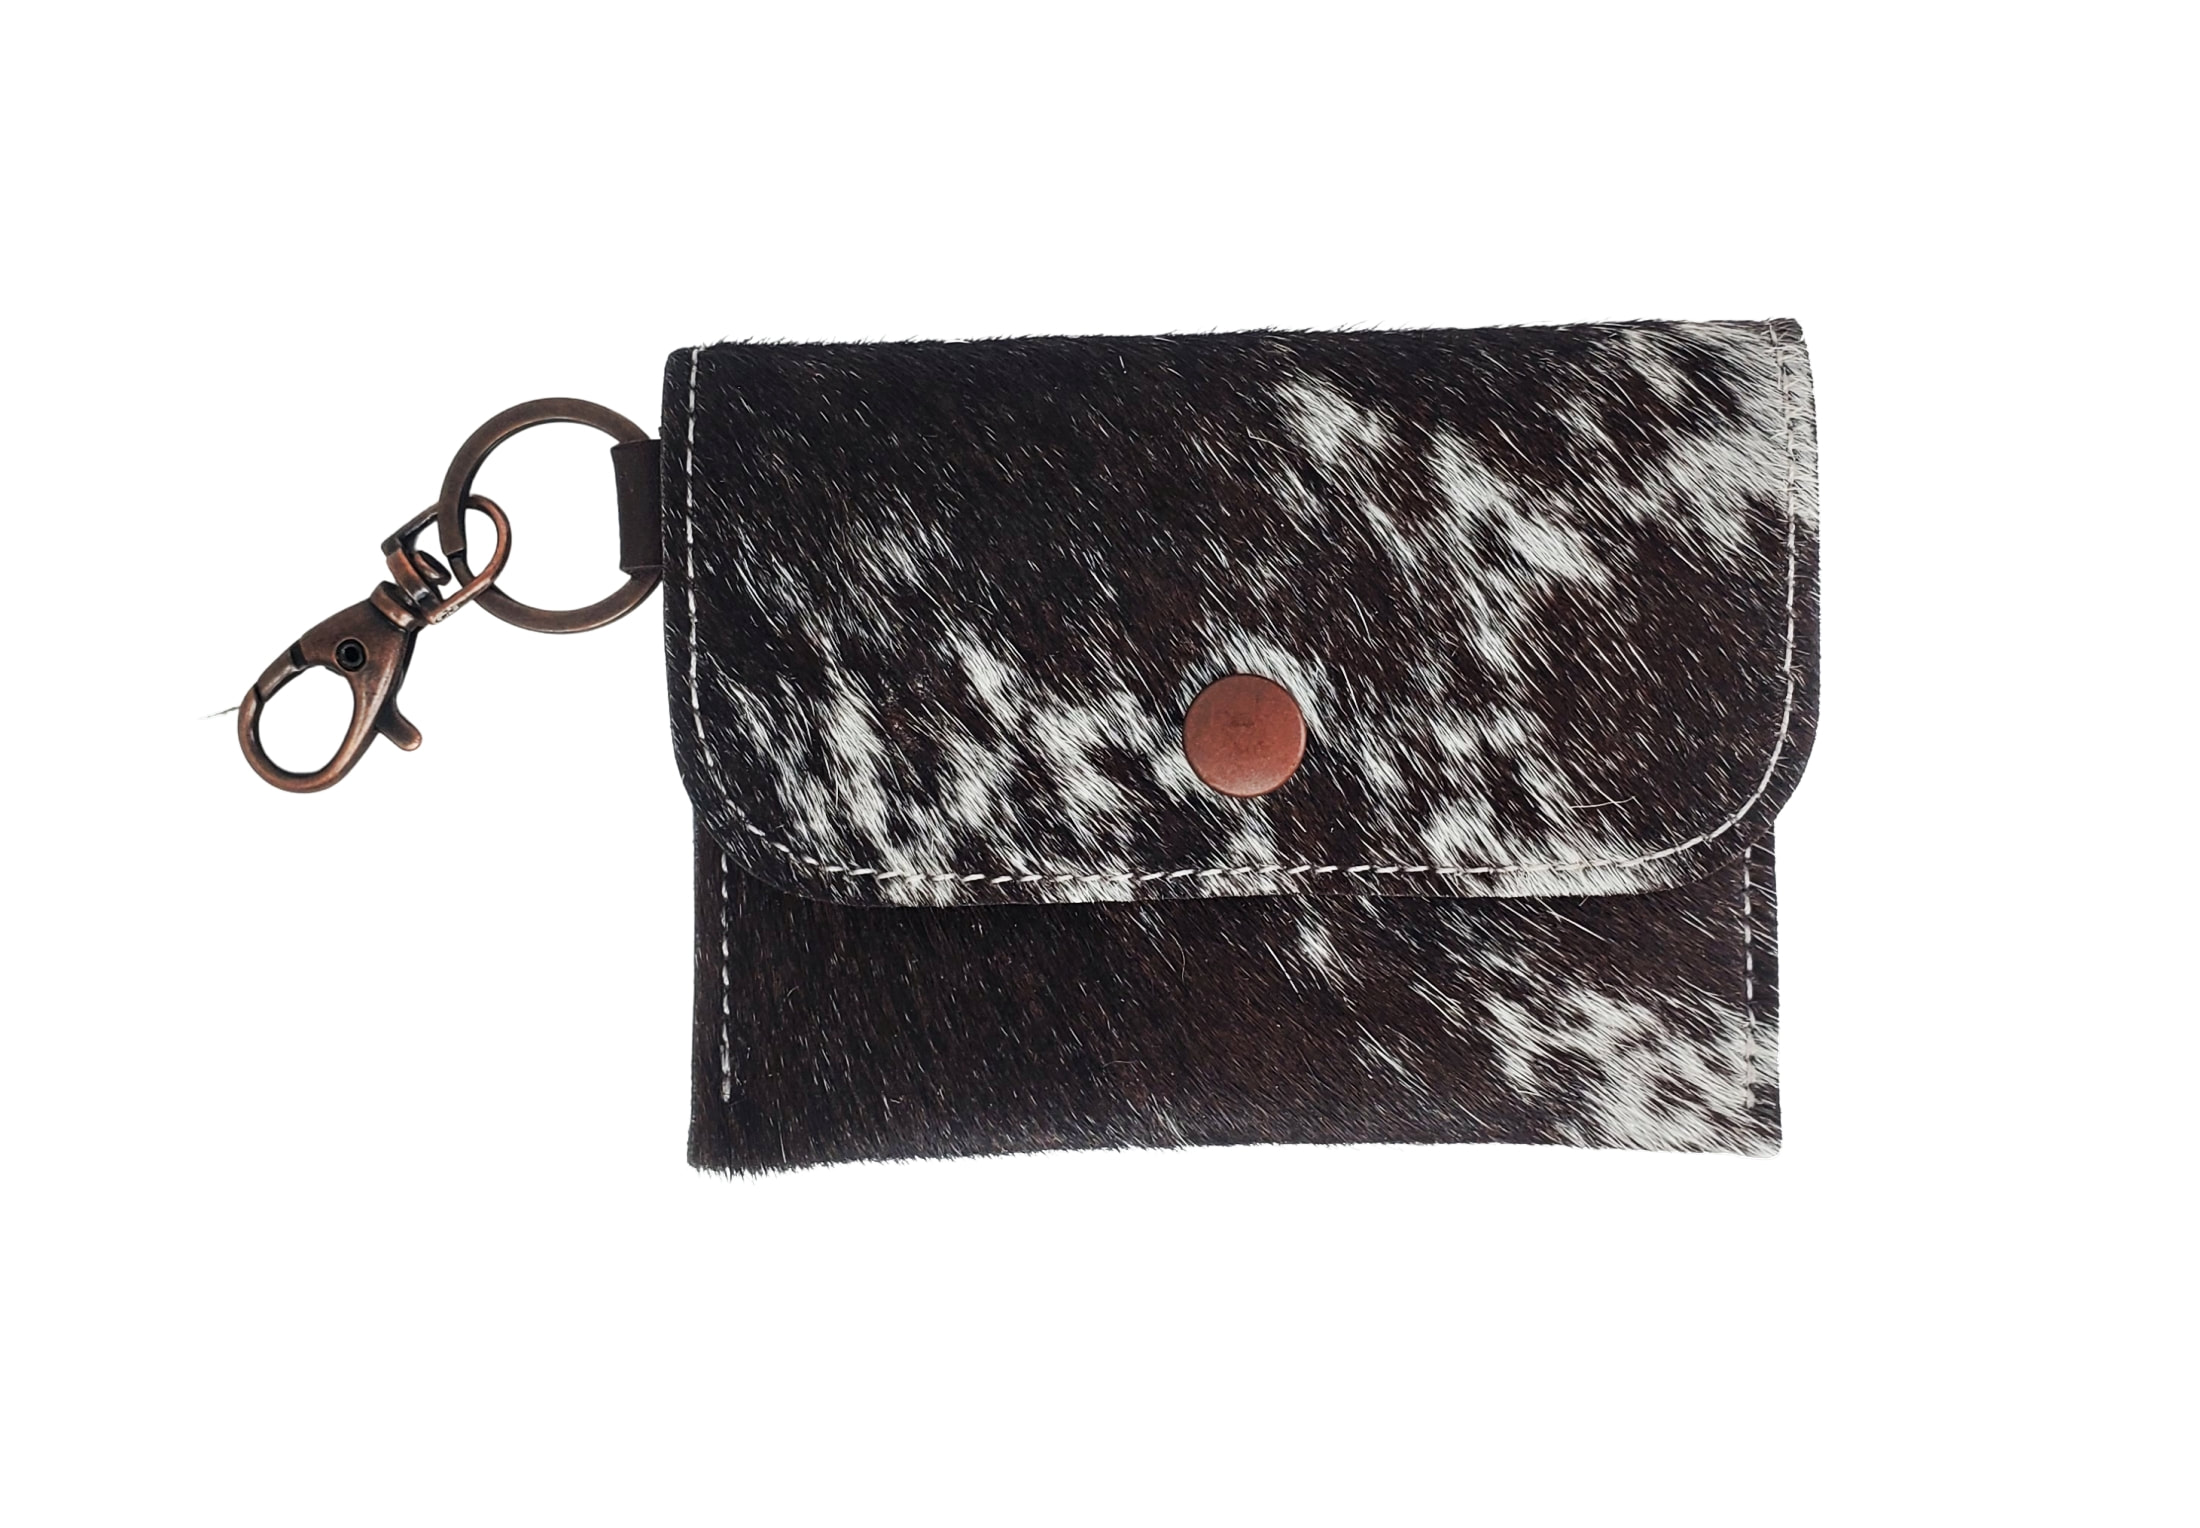  Key Chain ID Card Wallet, Fun Premium Acid Wash Hair On  Cowhide, Business Card Holder, Keep Cards Secure, Clip Inside Large Purse  to Grab & Go (Black/White - Gold Acid Wash) 